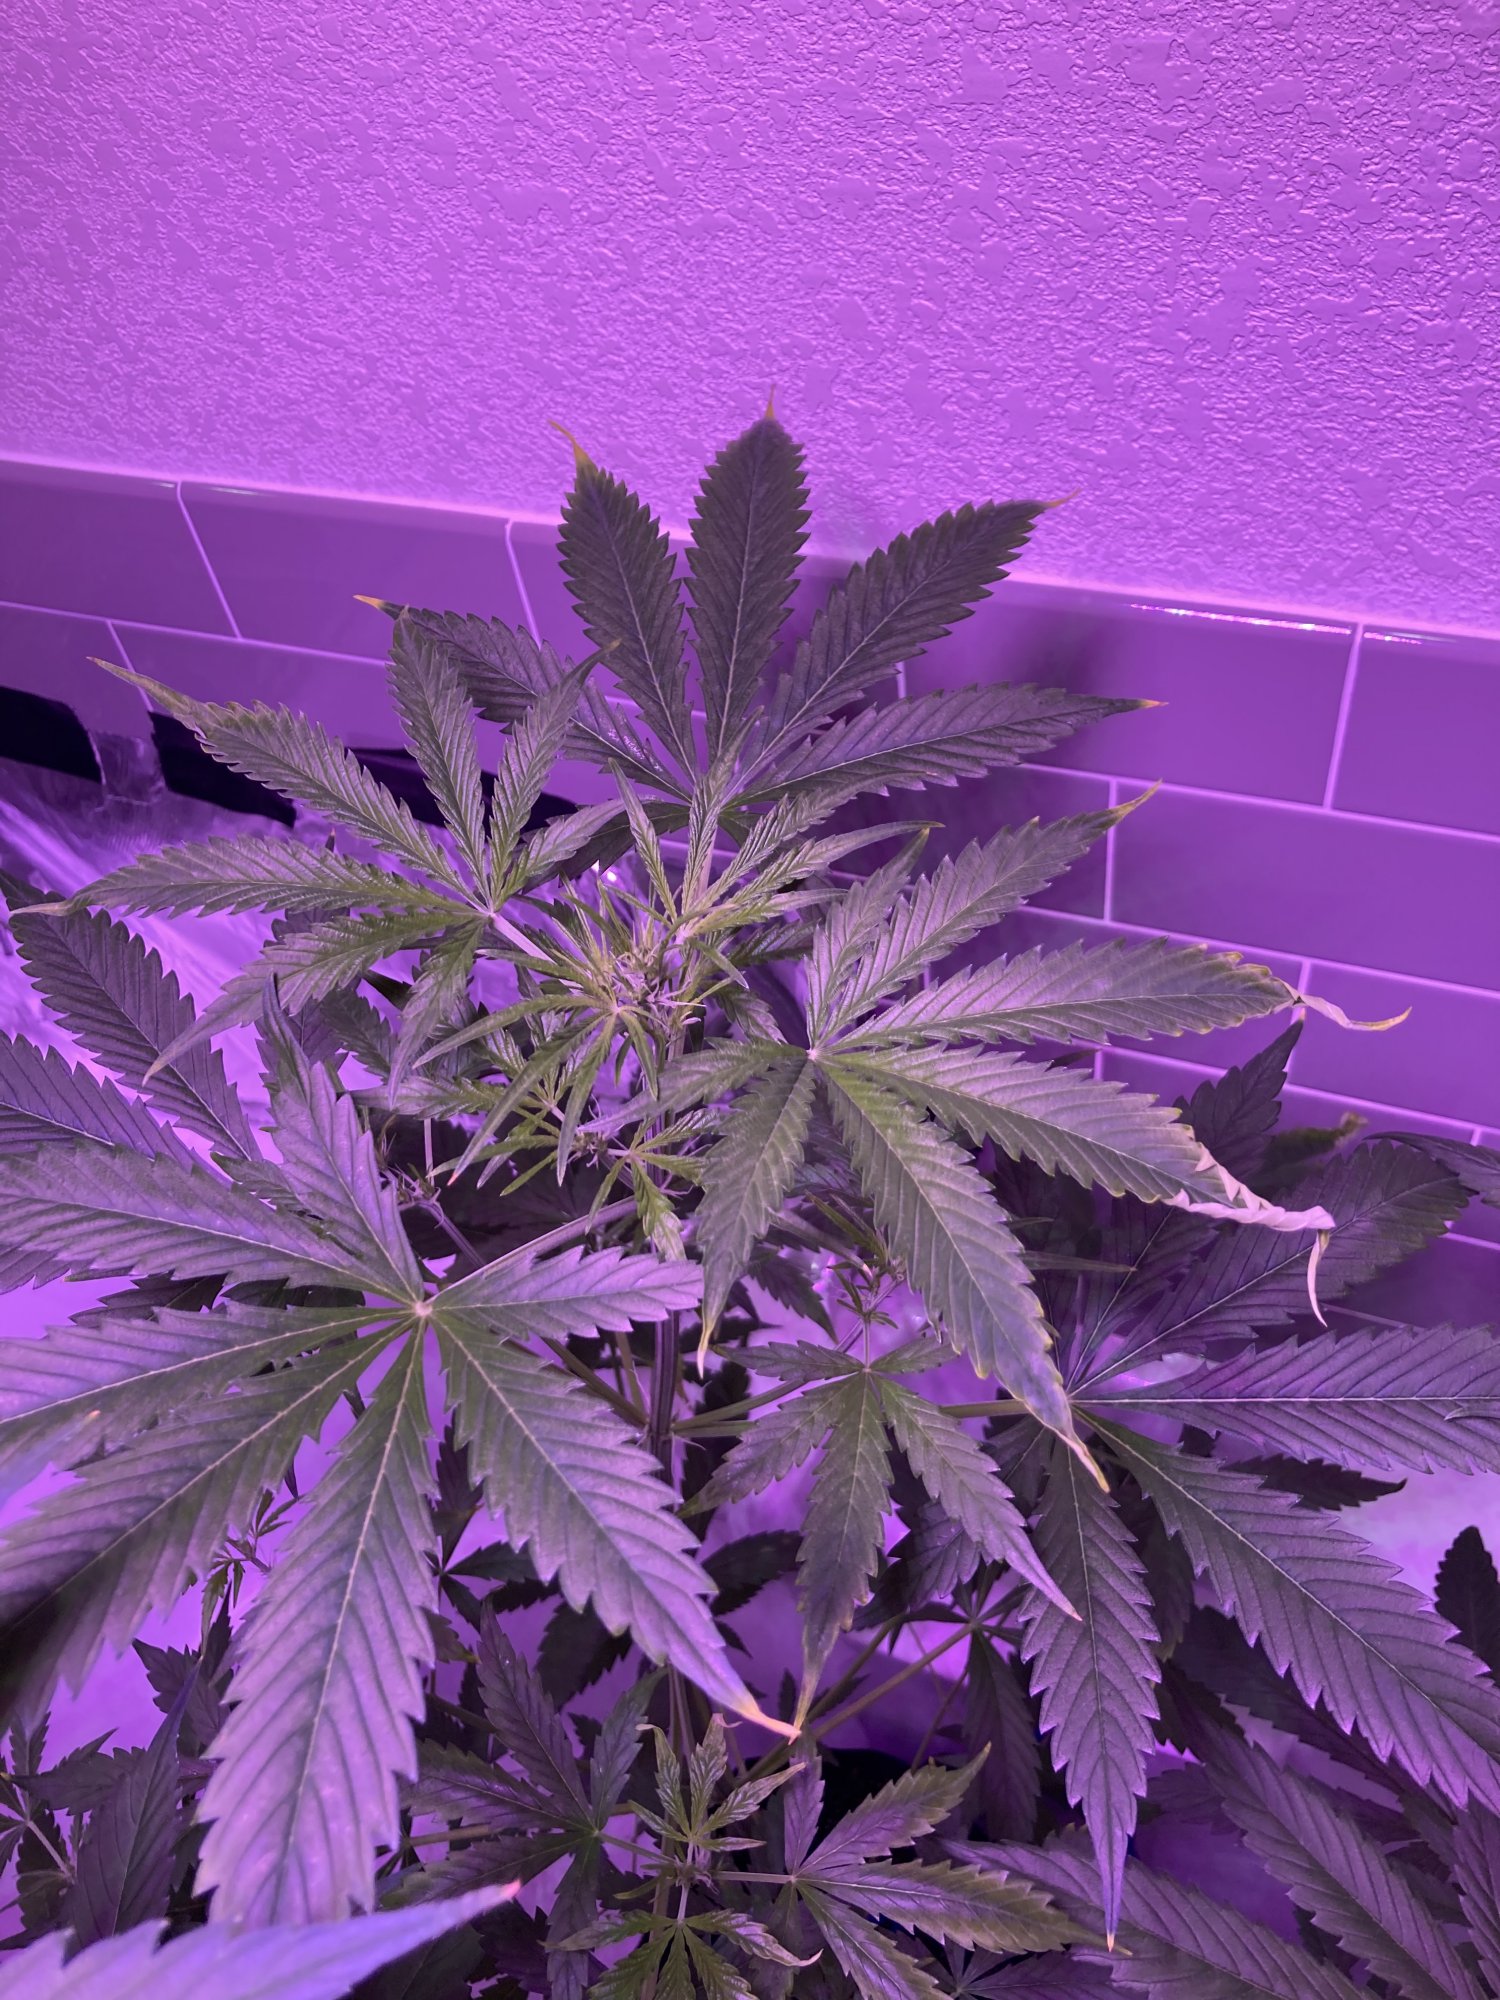 Need help with first grow